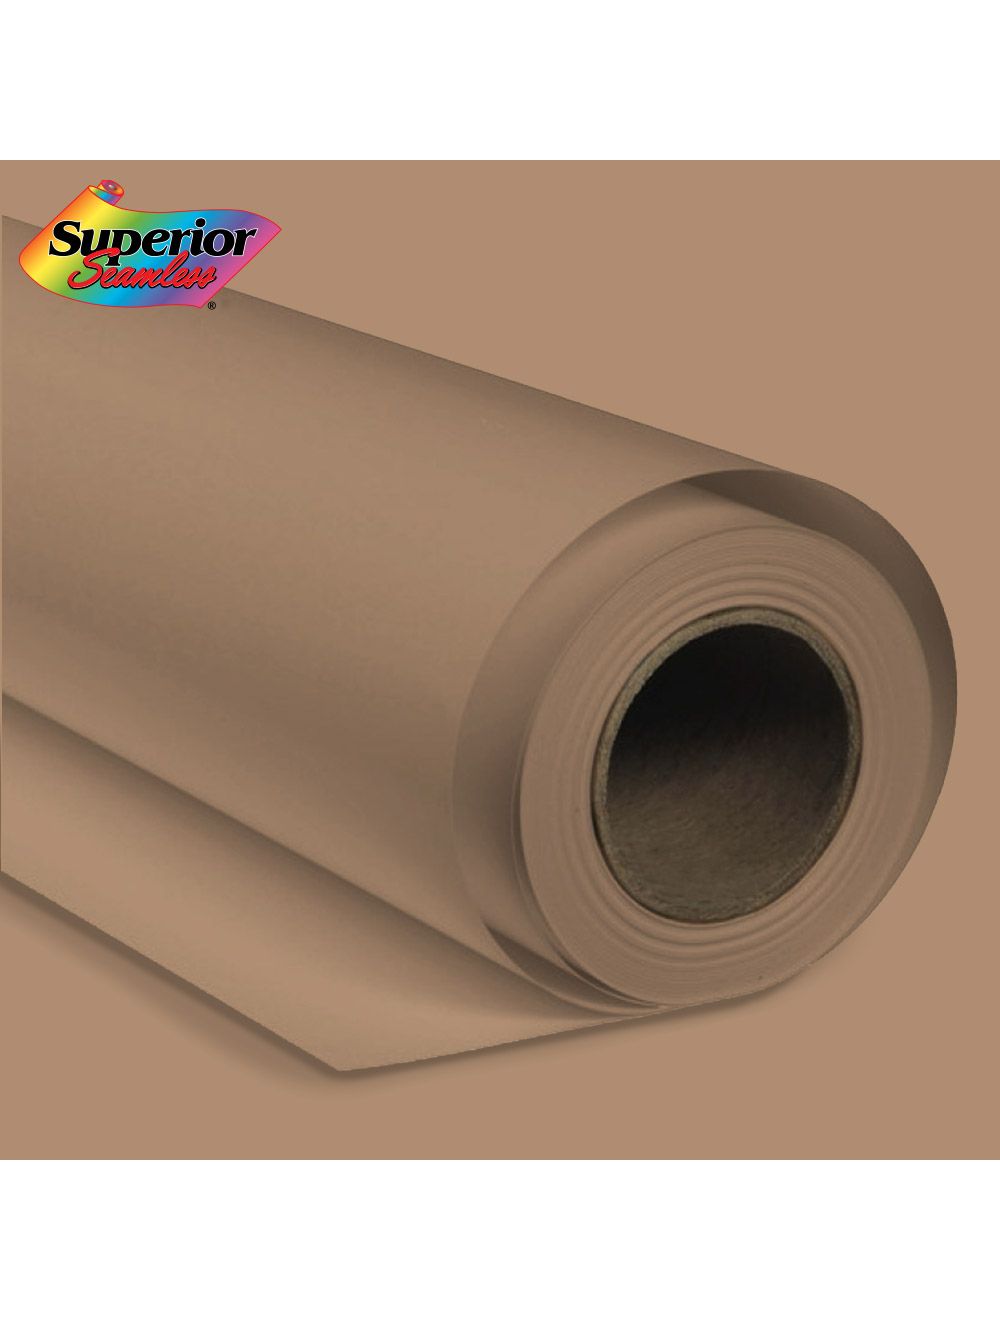 Superior Seamless 25 Beige Background Paper Roll  Borge's Imaging